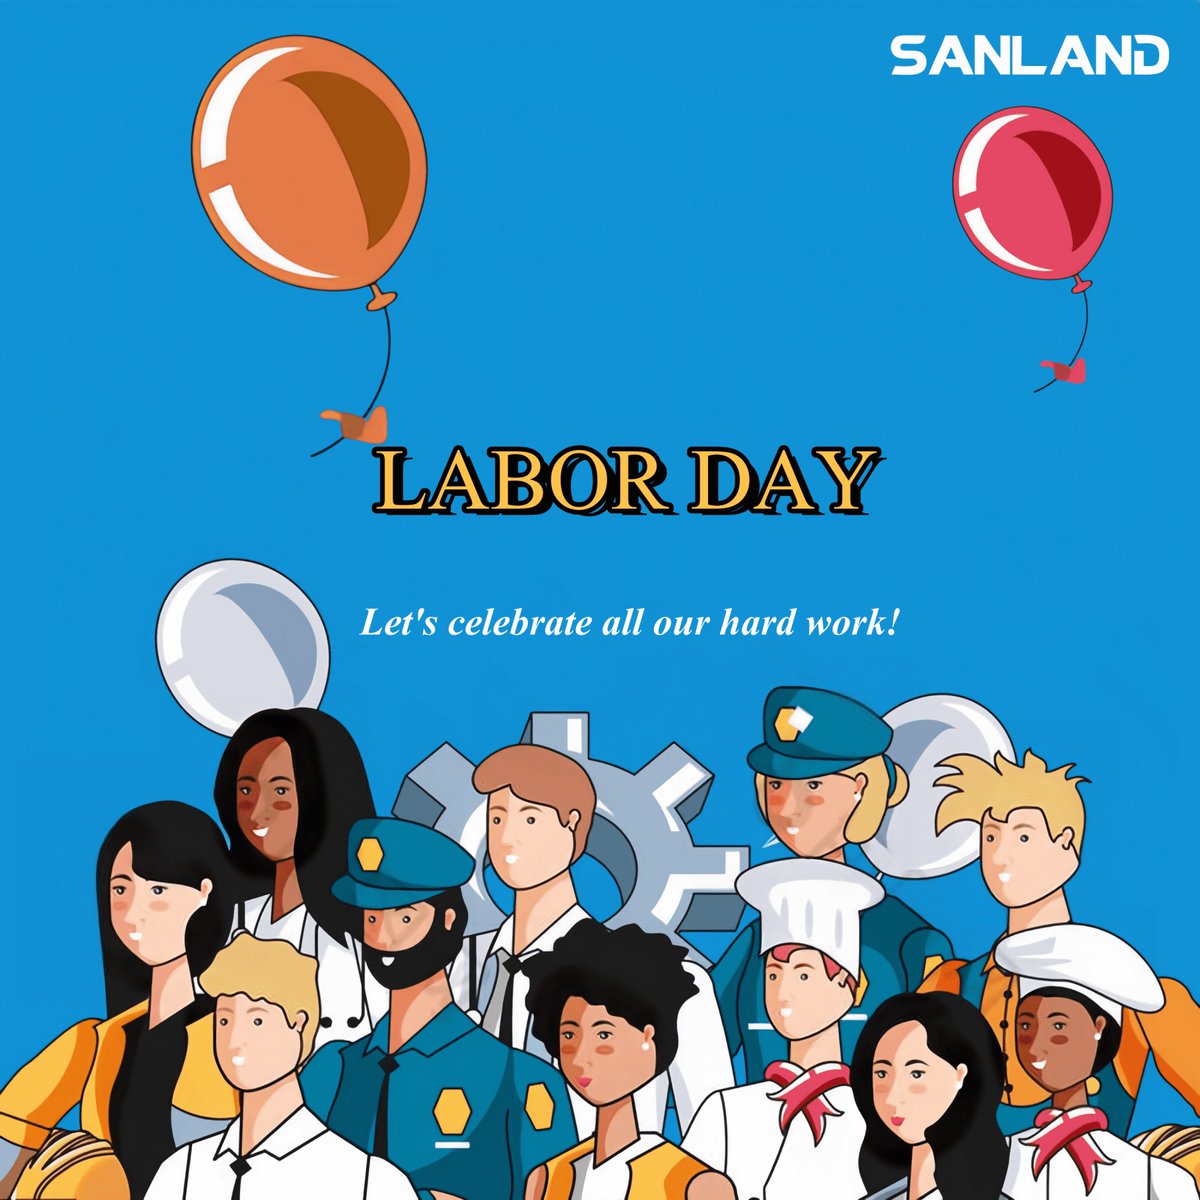 Cheers to the workers and innovators who make every day brighter! Wishing you a joyous Labor Day. May this holiday recharge and inspire you to meet the challenges ahead. The rest after work is the most comfortable, let's enjoy this holiday. Happy Labor Day to all!
#LaborDay #FTTx